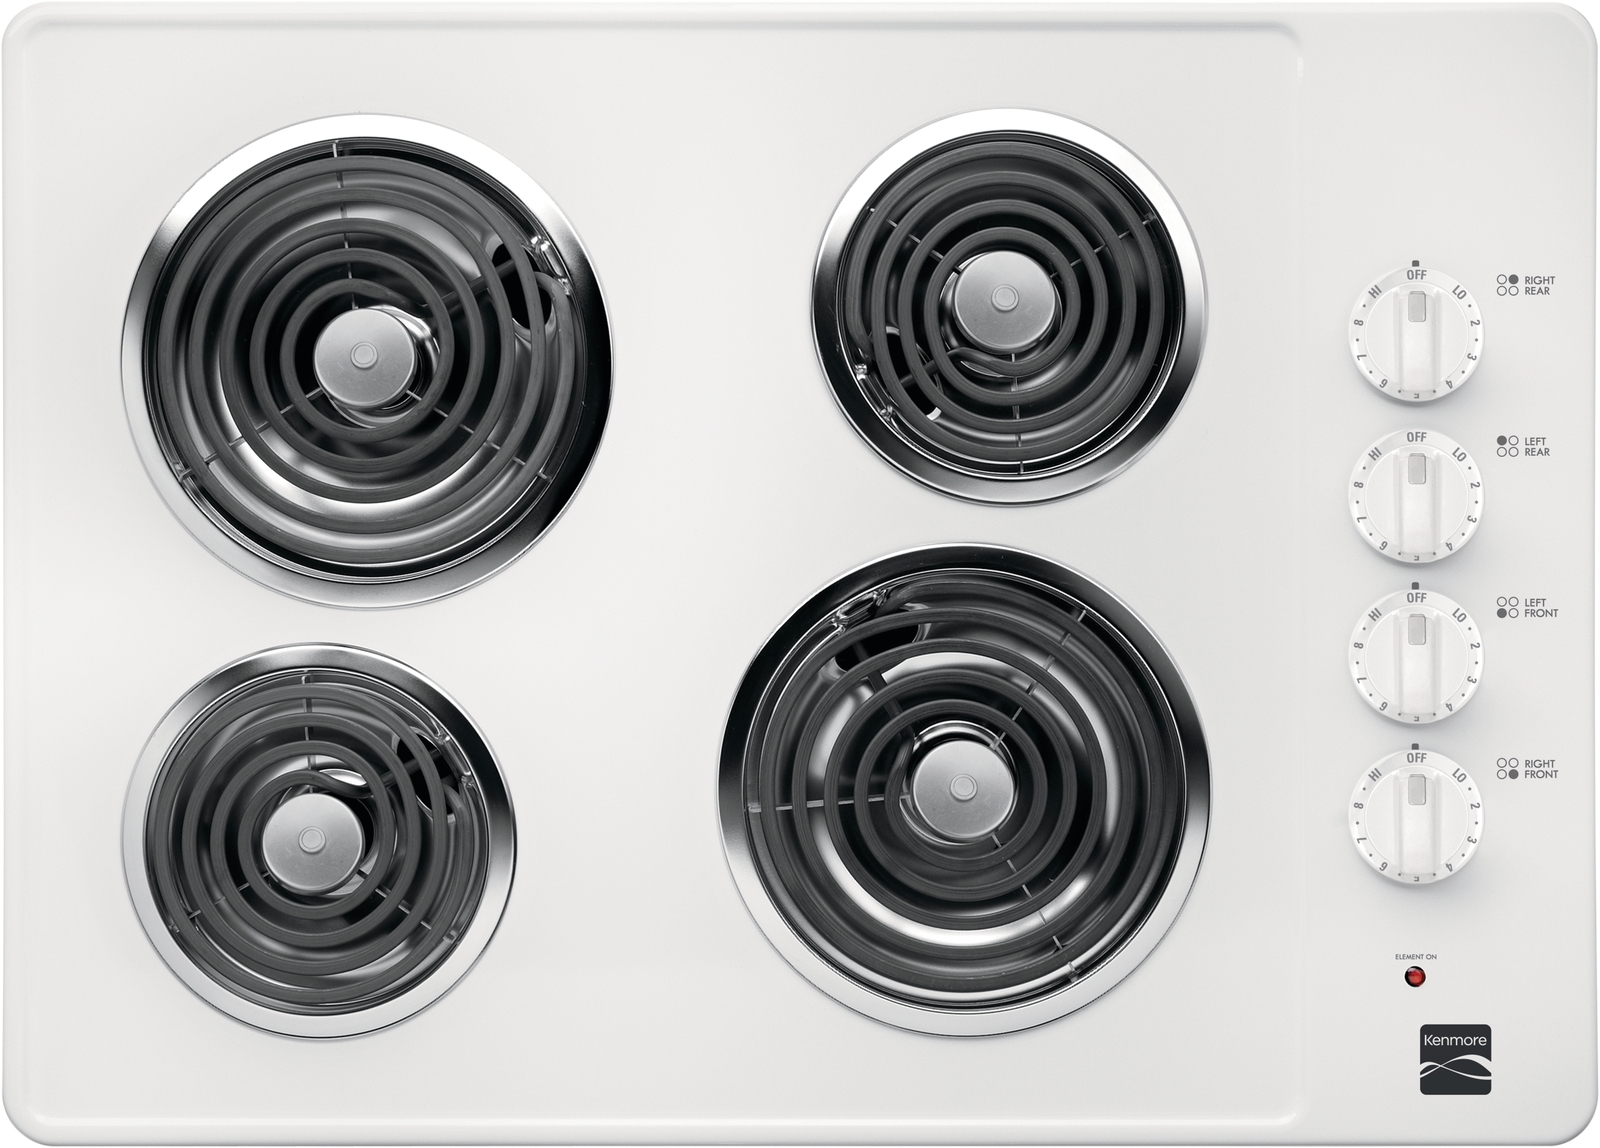 Kenmore 41302 30" Electric Coil Cooktop - White